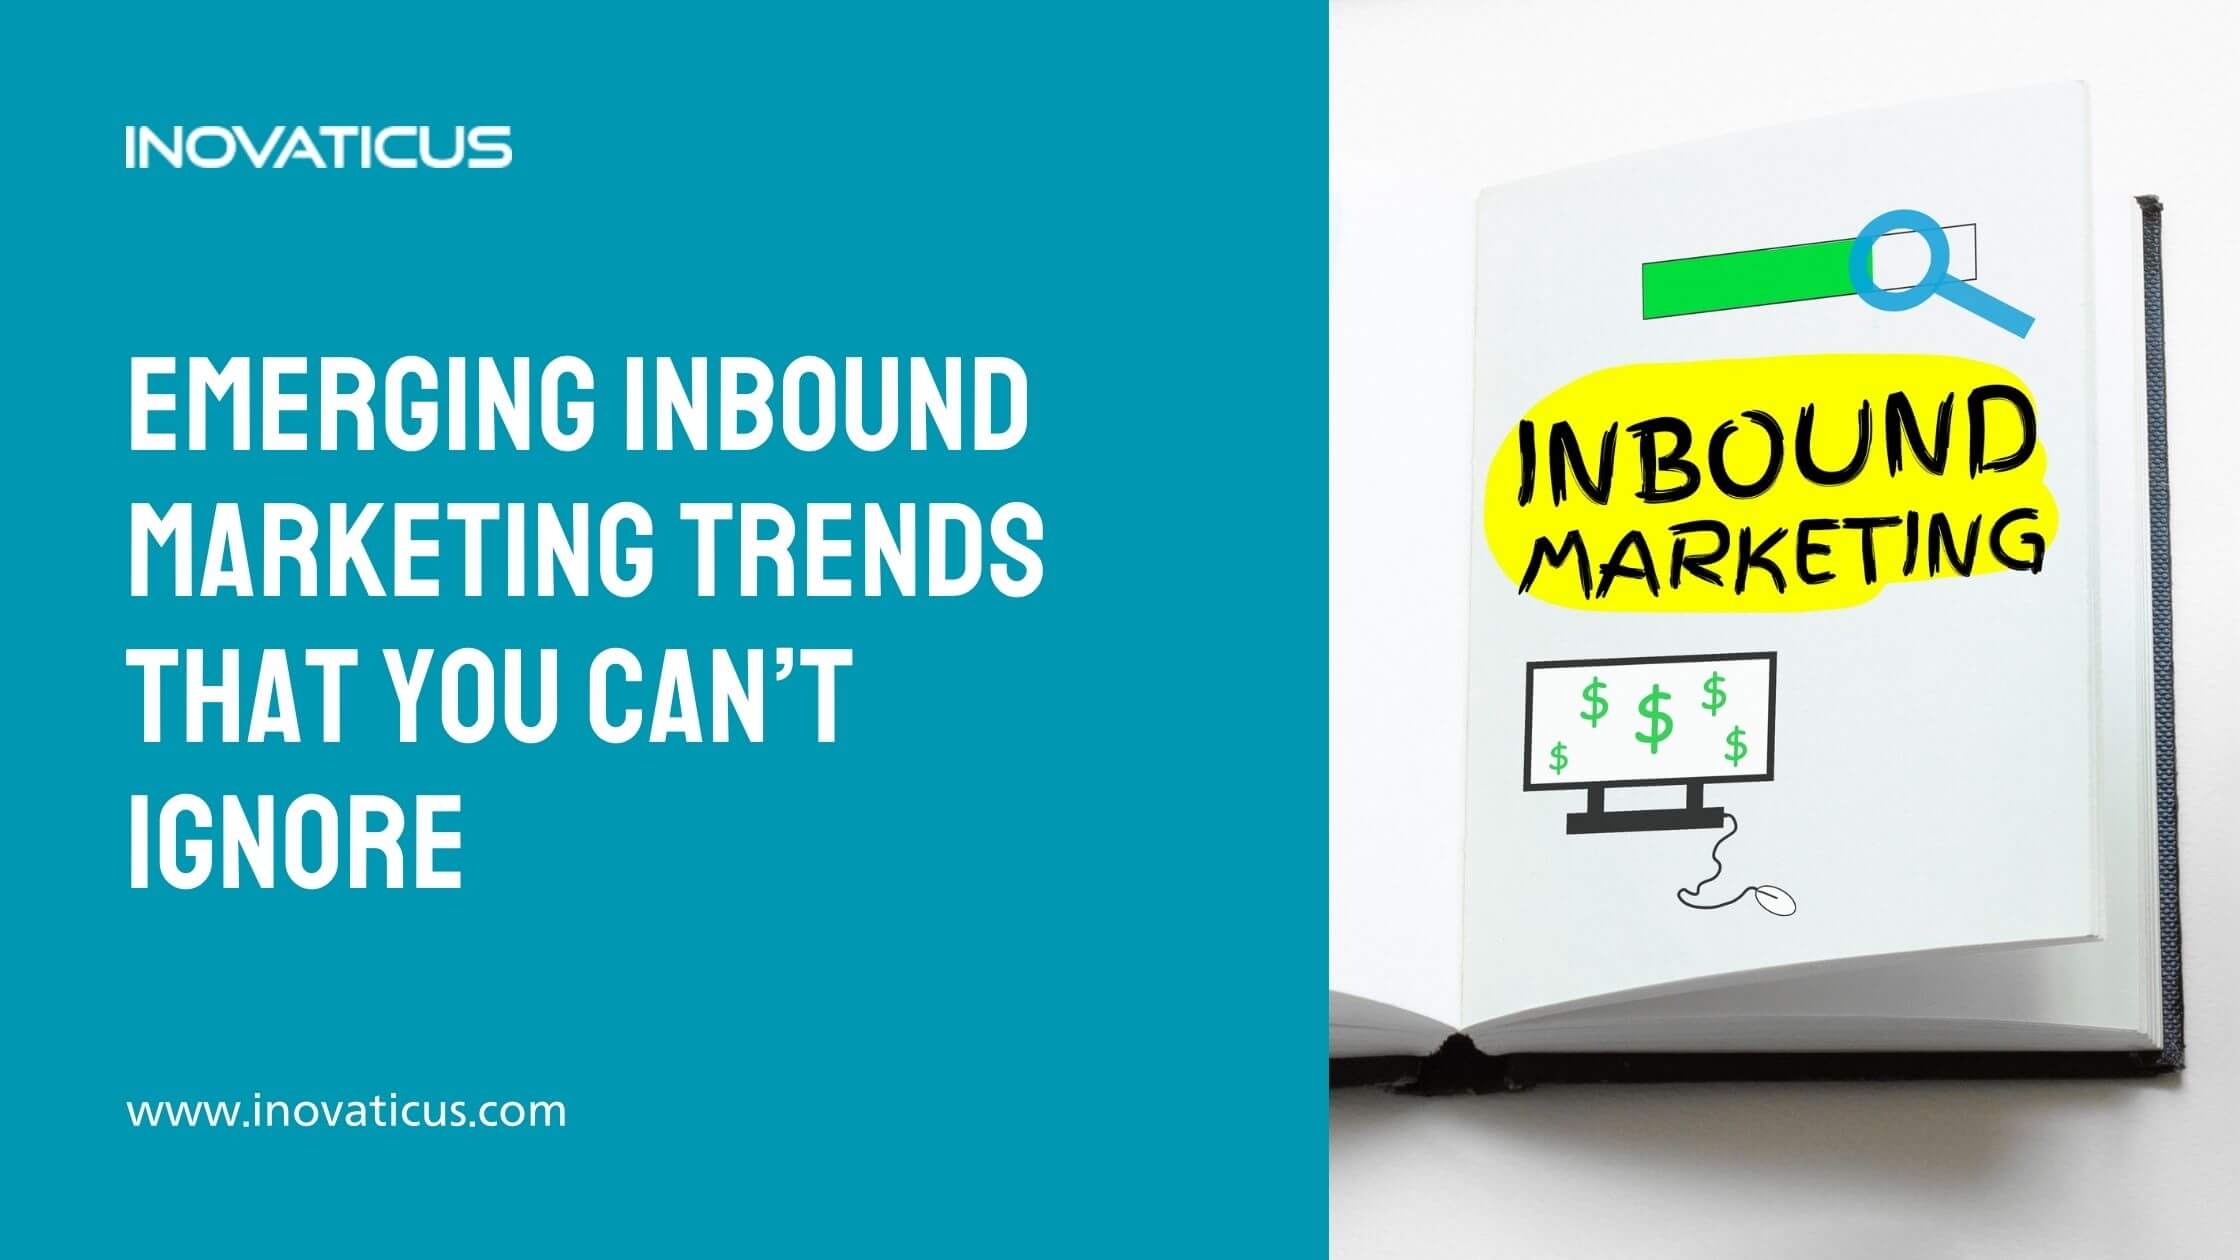 Emerging Inbound Marketing Trends That You Can’t Ignore